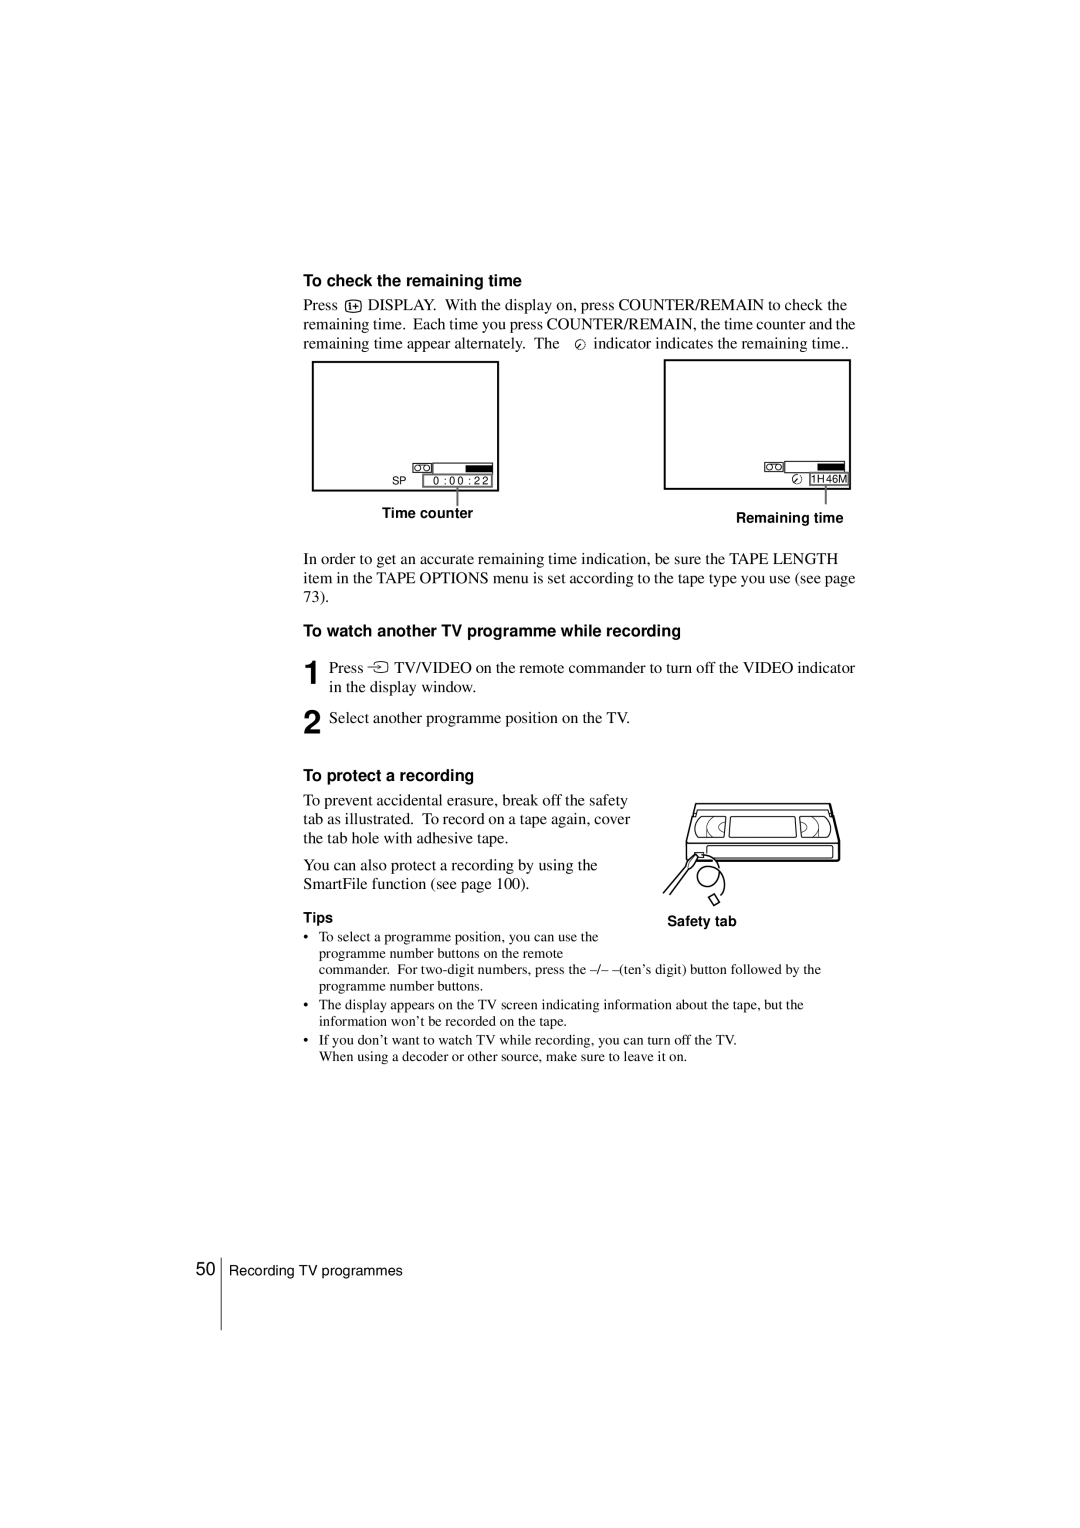 Sony SLV-SF990G manual To check the remaining time, To watch another TV programme while recording, To protect a recording 